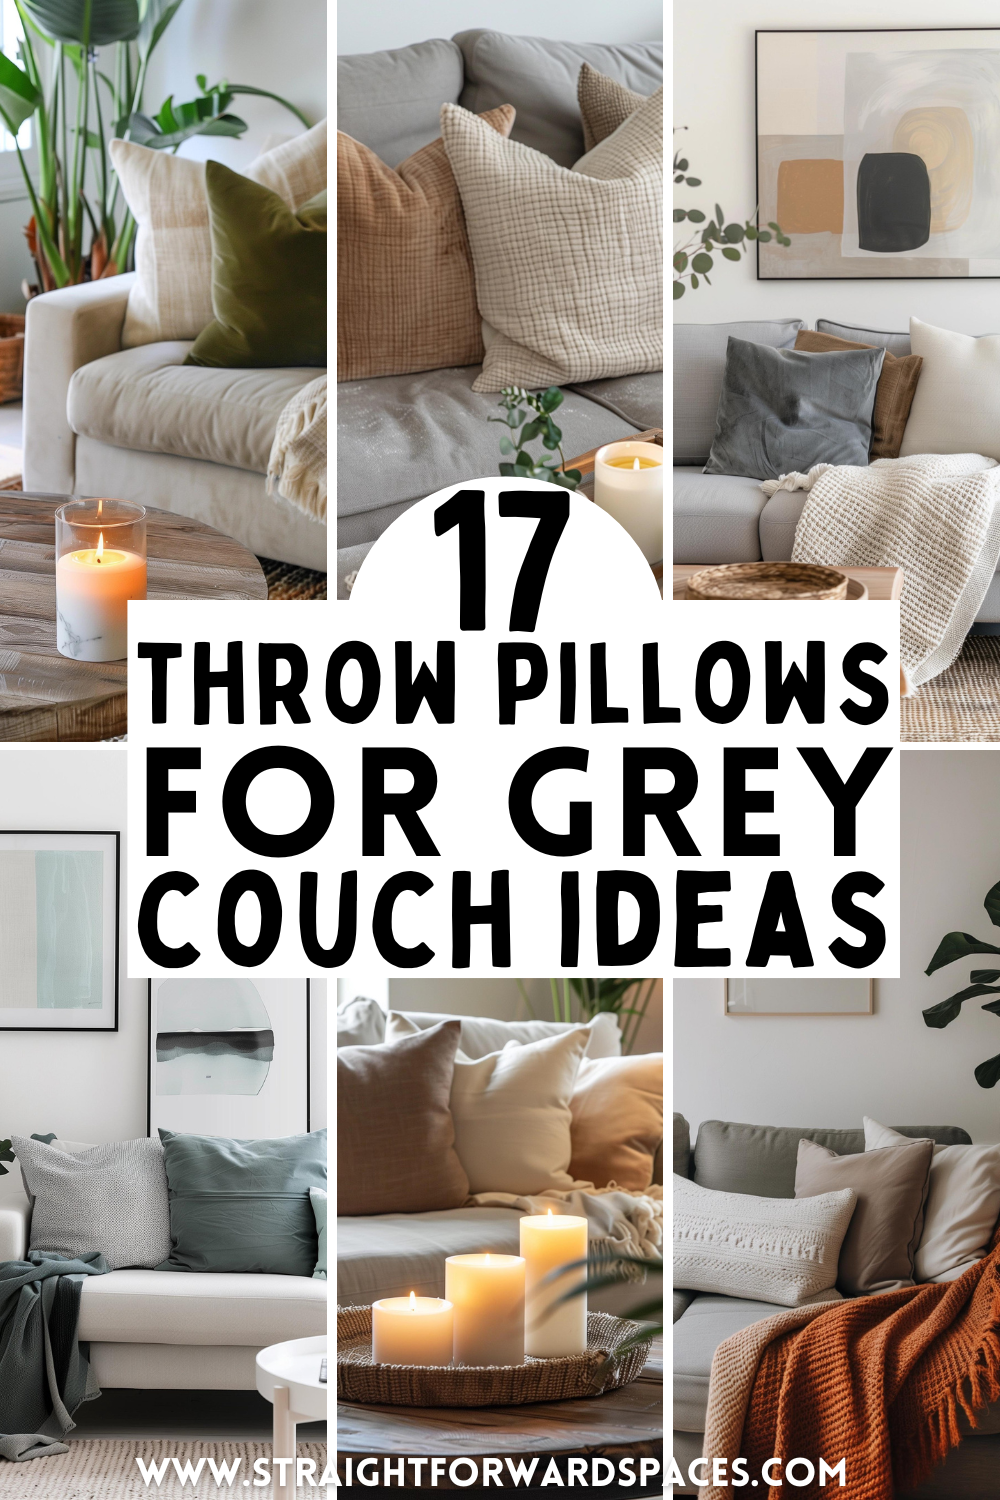 pillows for grey couch